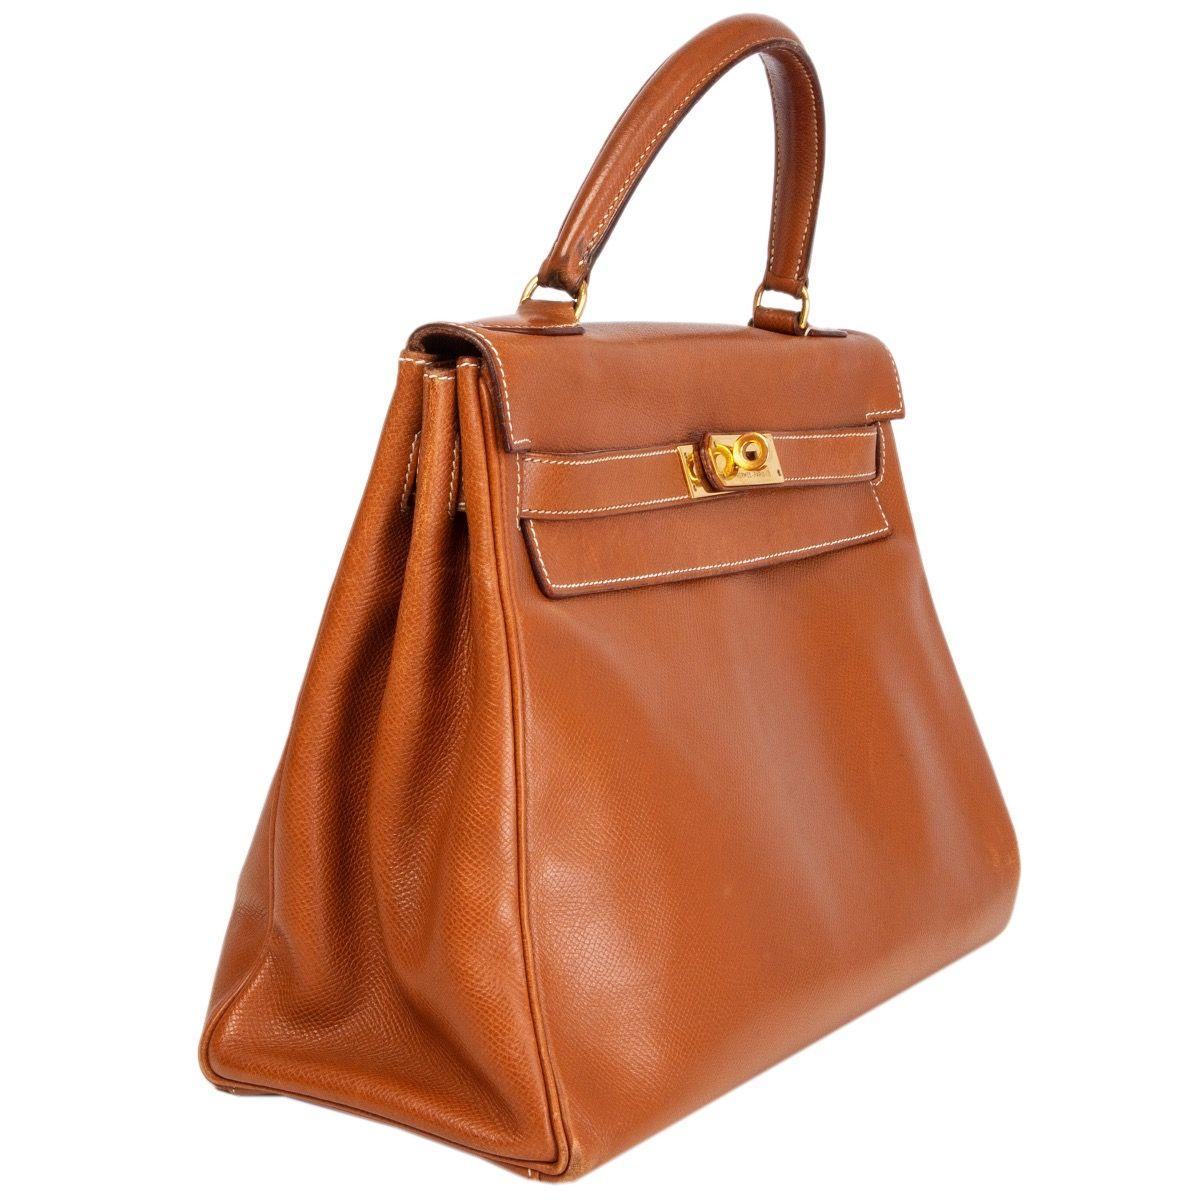 Hermes 'Kelly I 32 Retourne' bag in Gold (camel) Veau Courchevel leather with contrasting white stitching. Lined in Chevre (goat skin) with two open pockets against the front and a zipper pocket against the back. Has been carried with overall signs